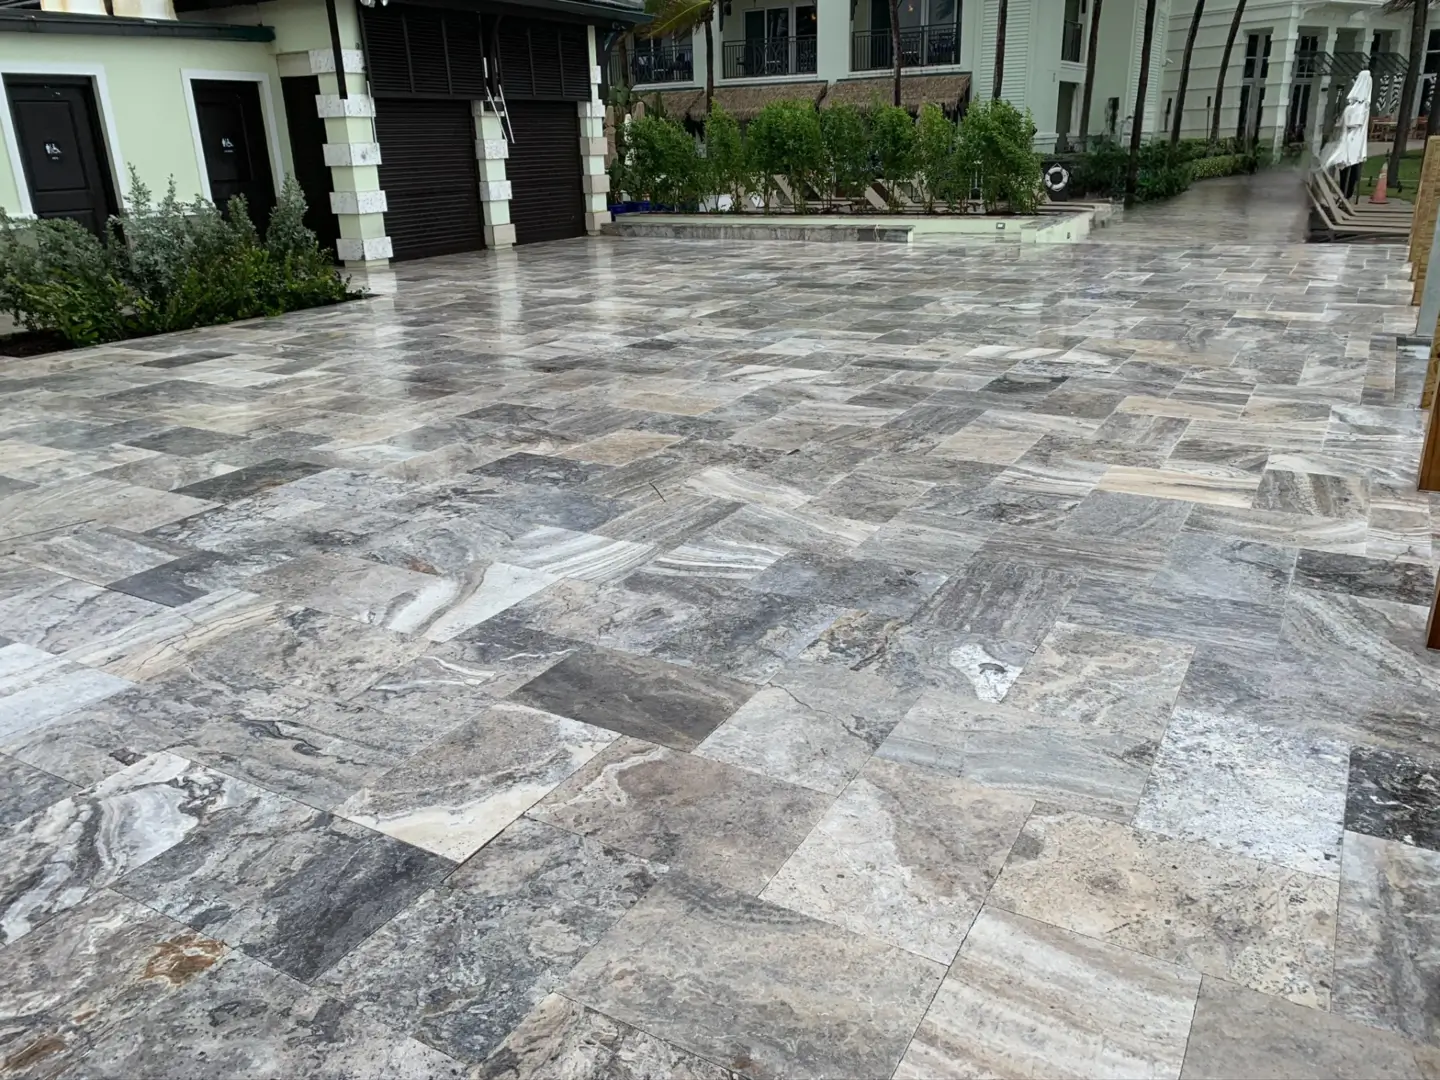 A large driveway paved with interlocking gray stone tiles, leading towards a row of modern houses with garages. The area is clean and wet, indicating recent rainfall or washing.